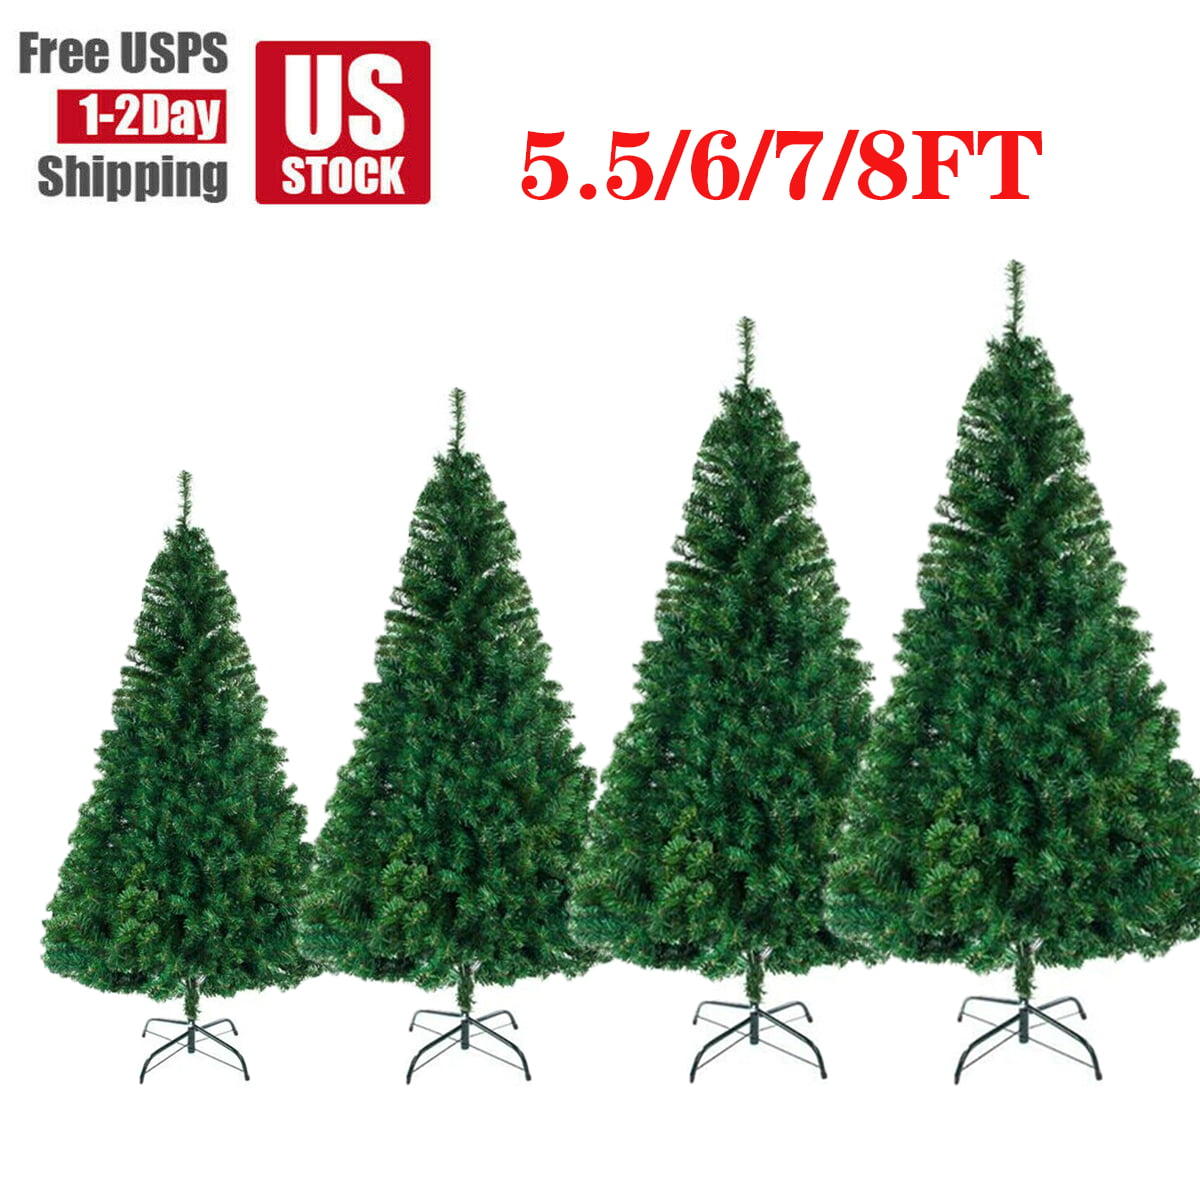 New Green Premium Traditional Indoor Artificial Christmas Xmas Tree 4,5,6,7,8FT 